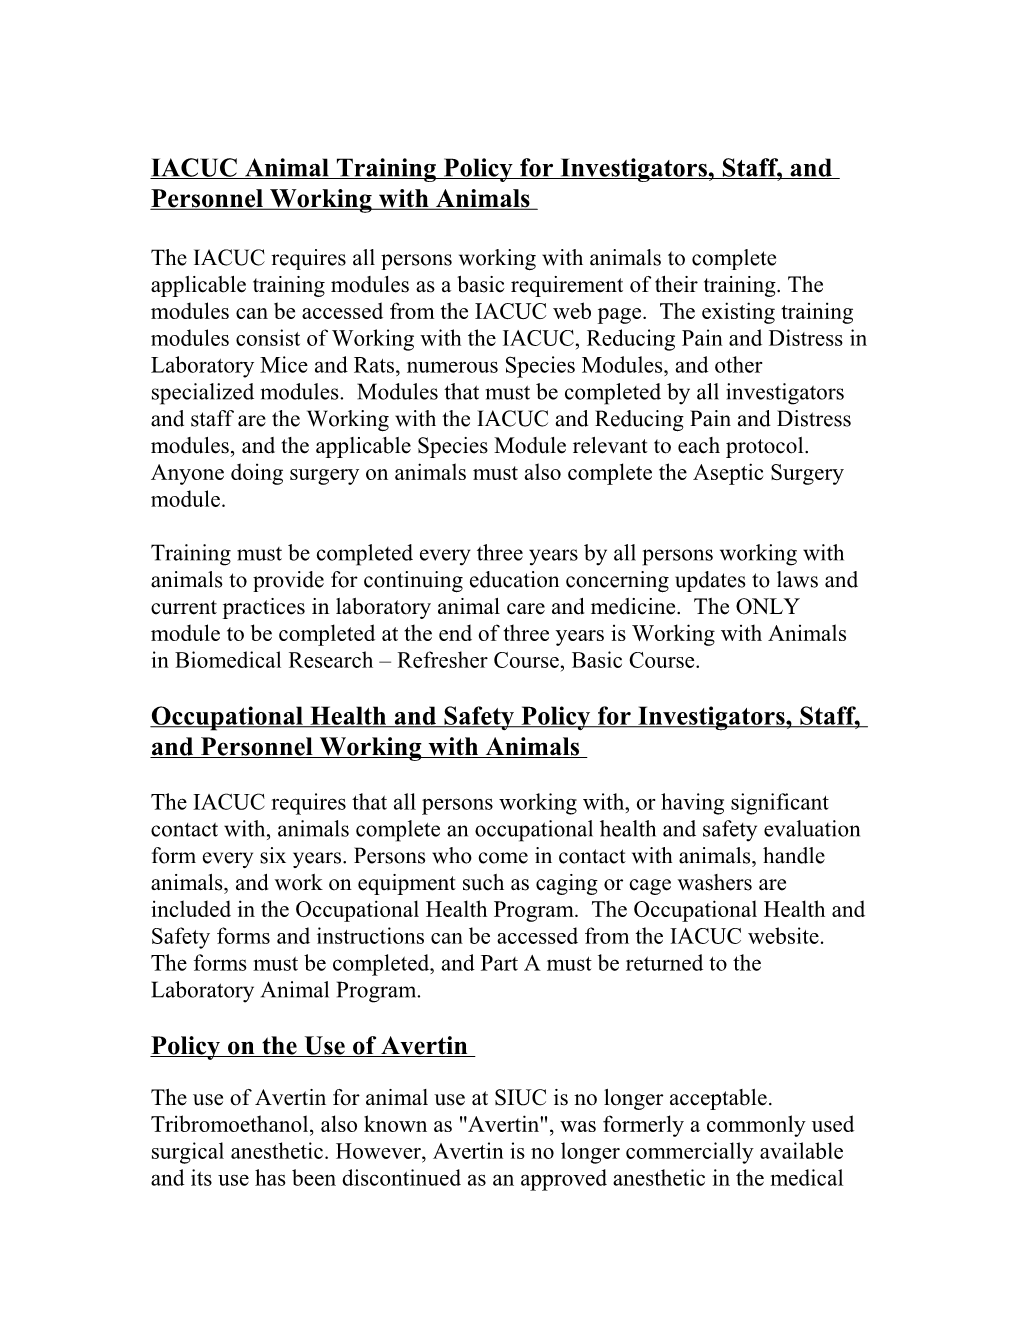 IACUC Mandatory Animal Training Policy for Investigators, Staff, and Personnel Working